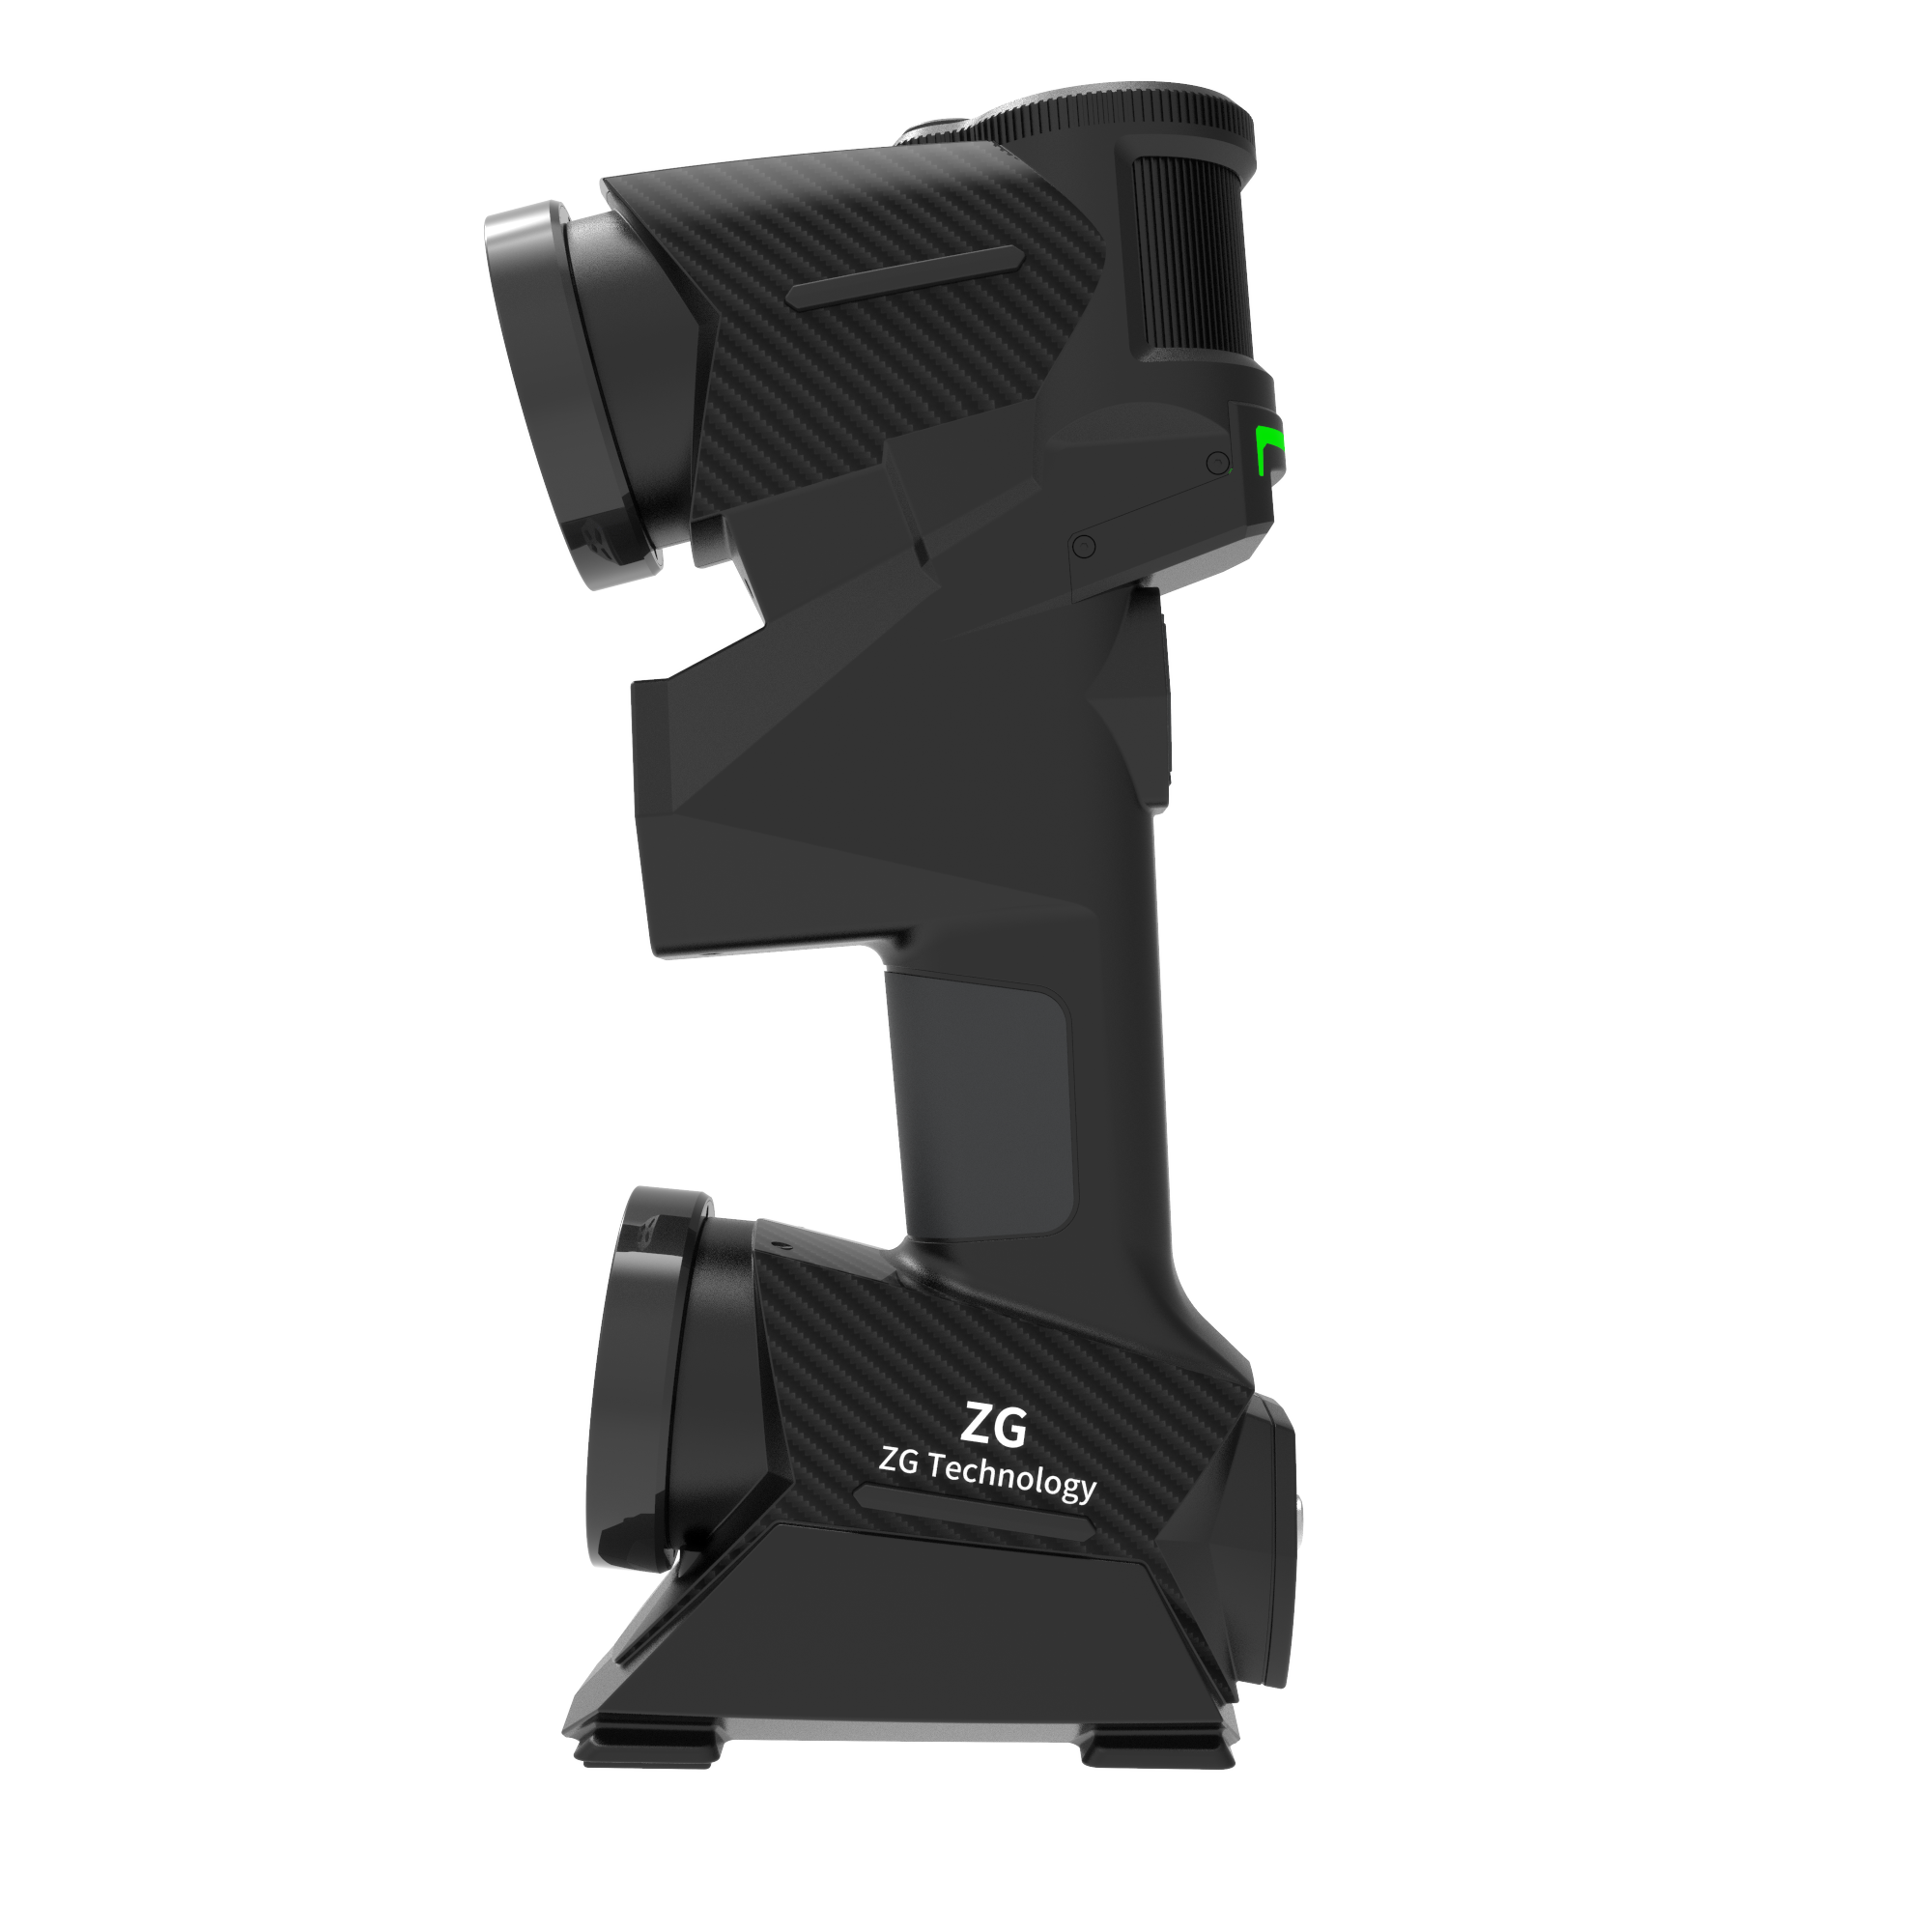 MarvelScan Tracker Free Marker Free Portable 3D Laser Scanner with Built In Photogrammetry